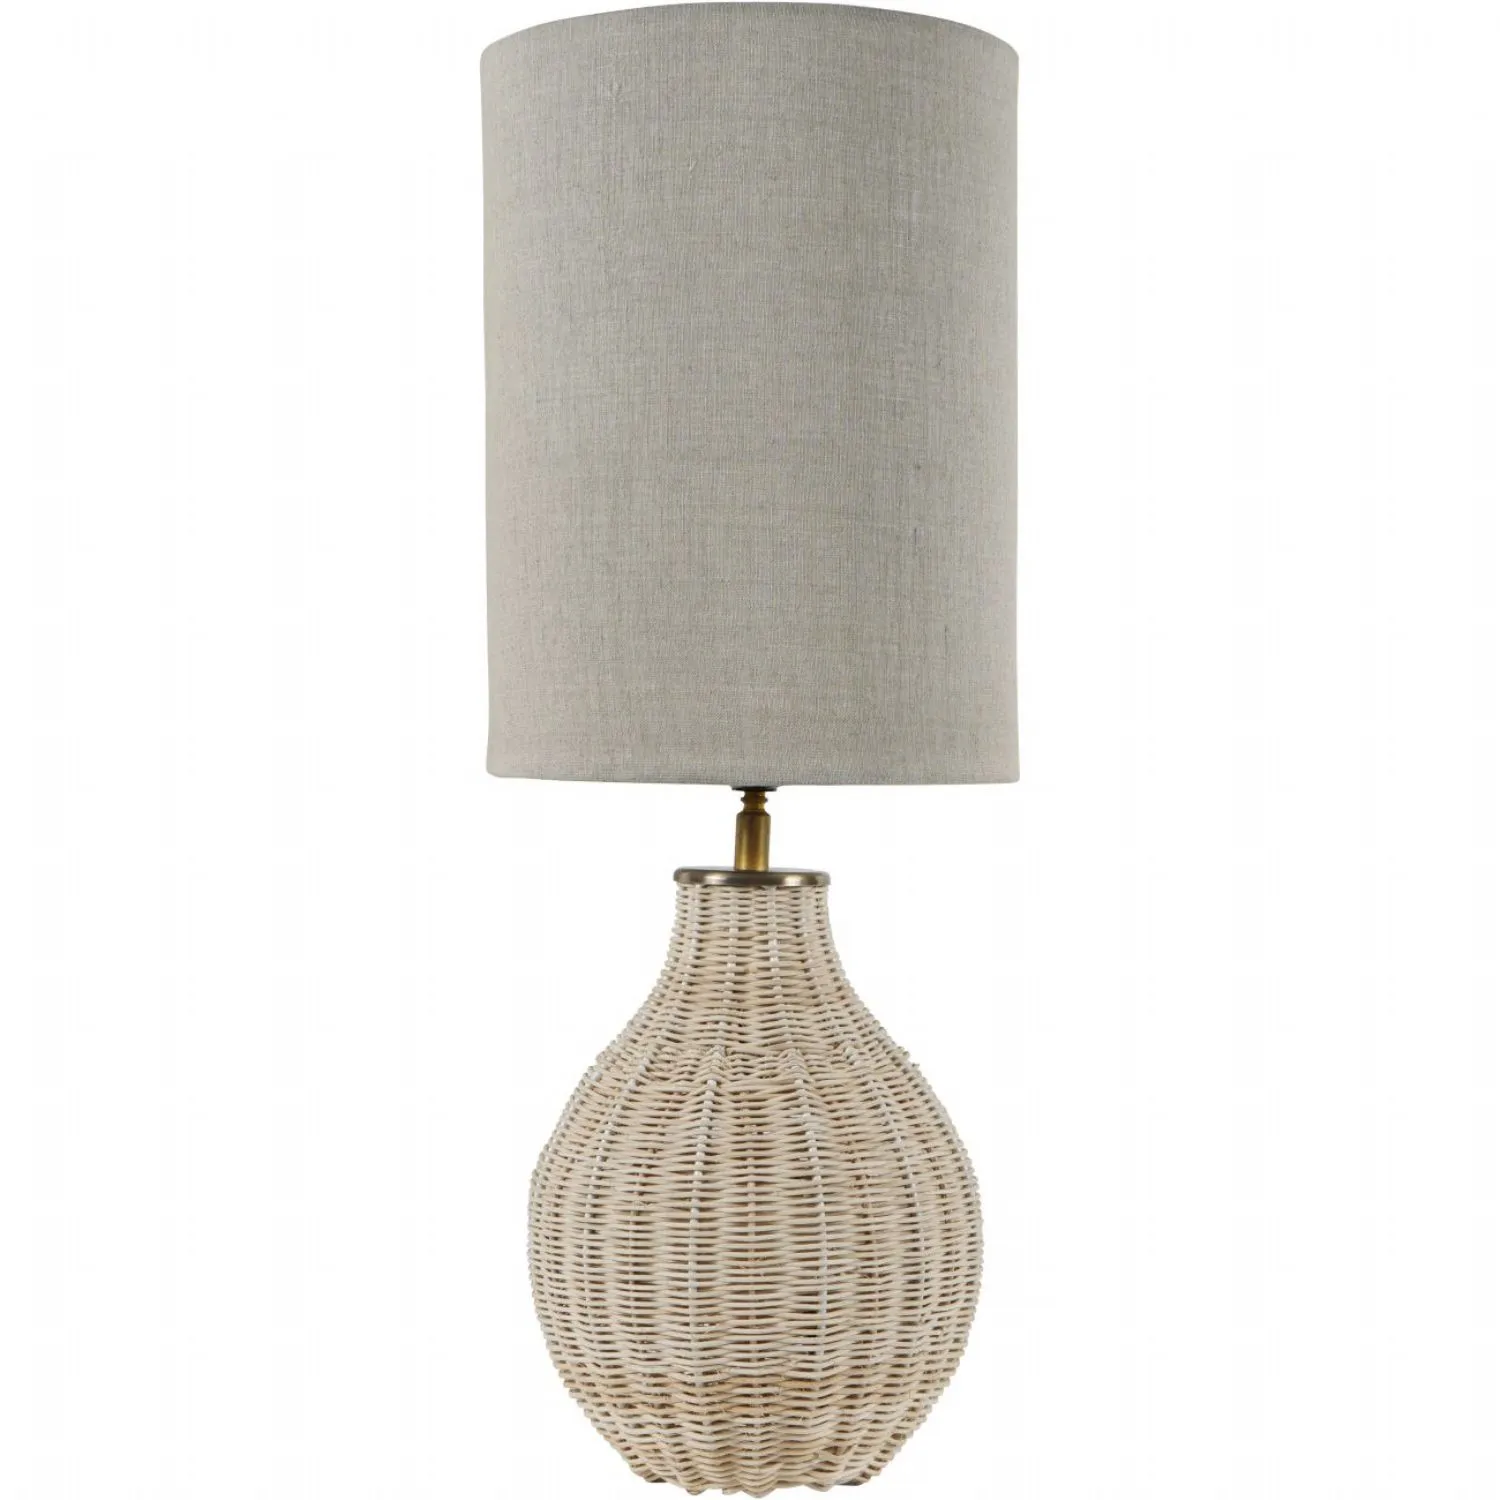 Natural Rattan Lamp with Drum Shade Small